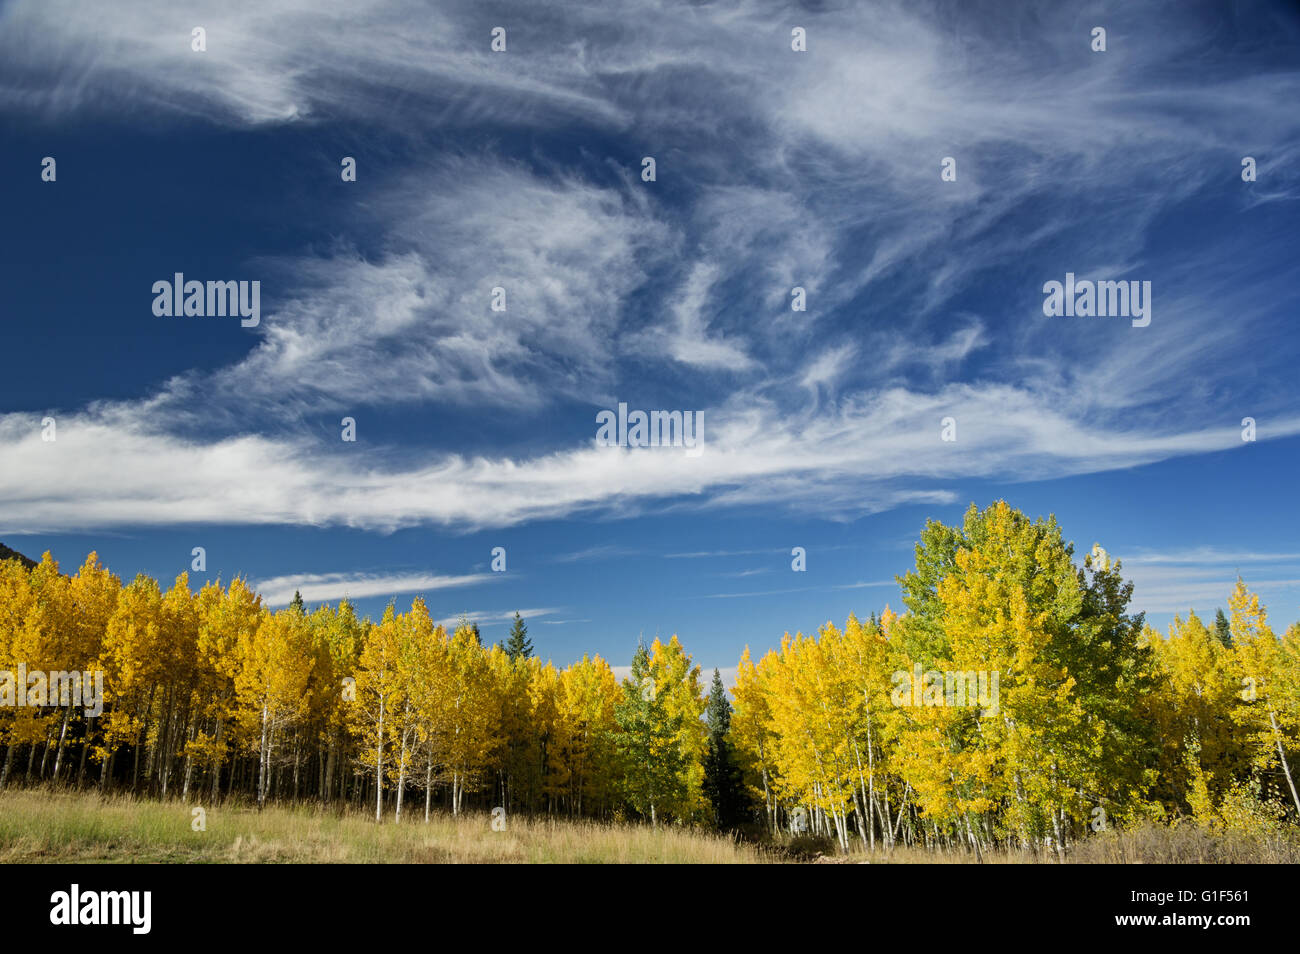 aspen trees in the fall with yellow leaves and a partly cloudy blue sky above it Stock Photo